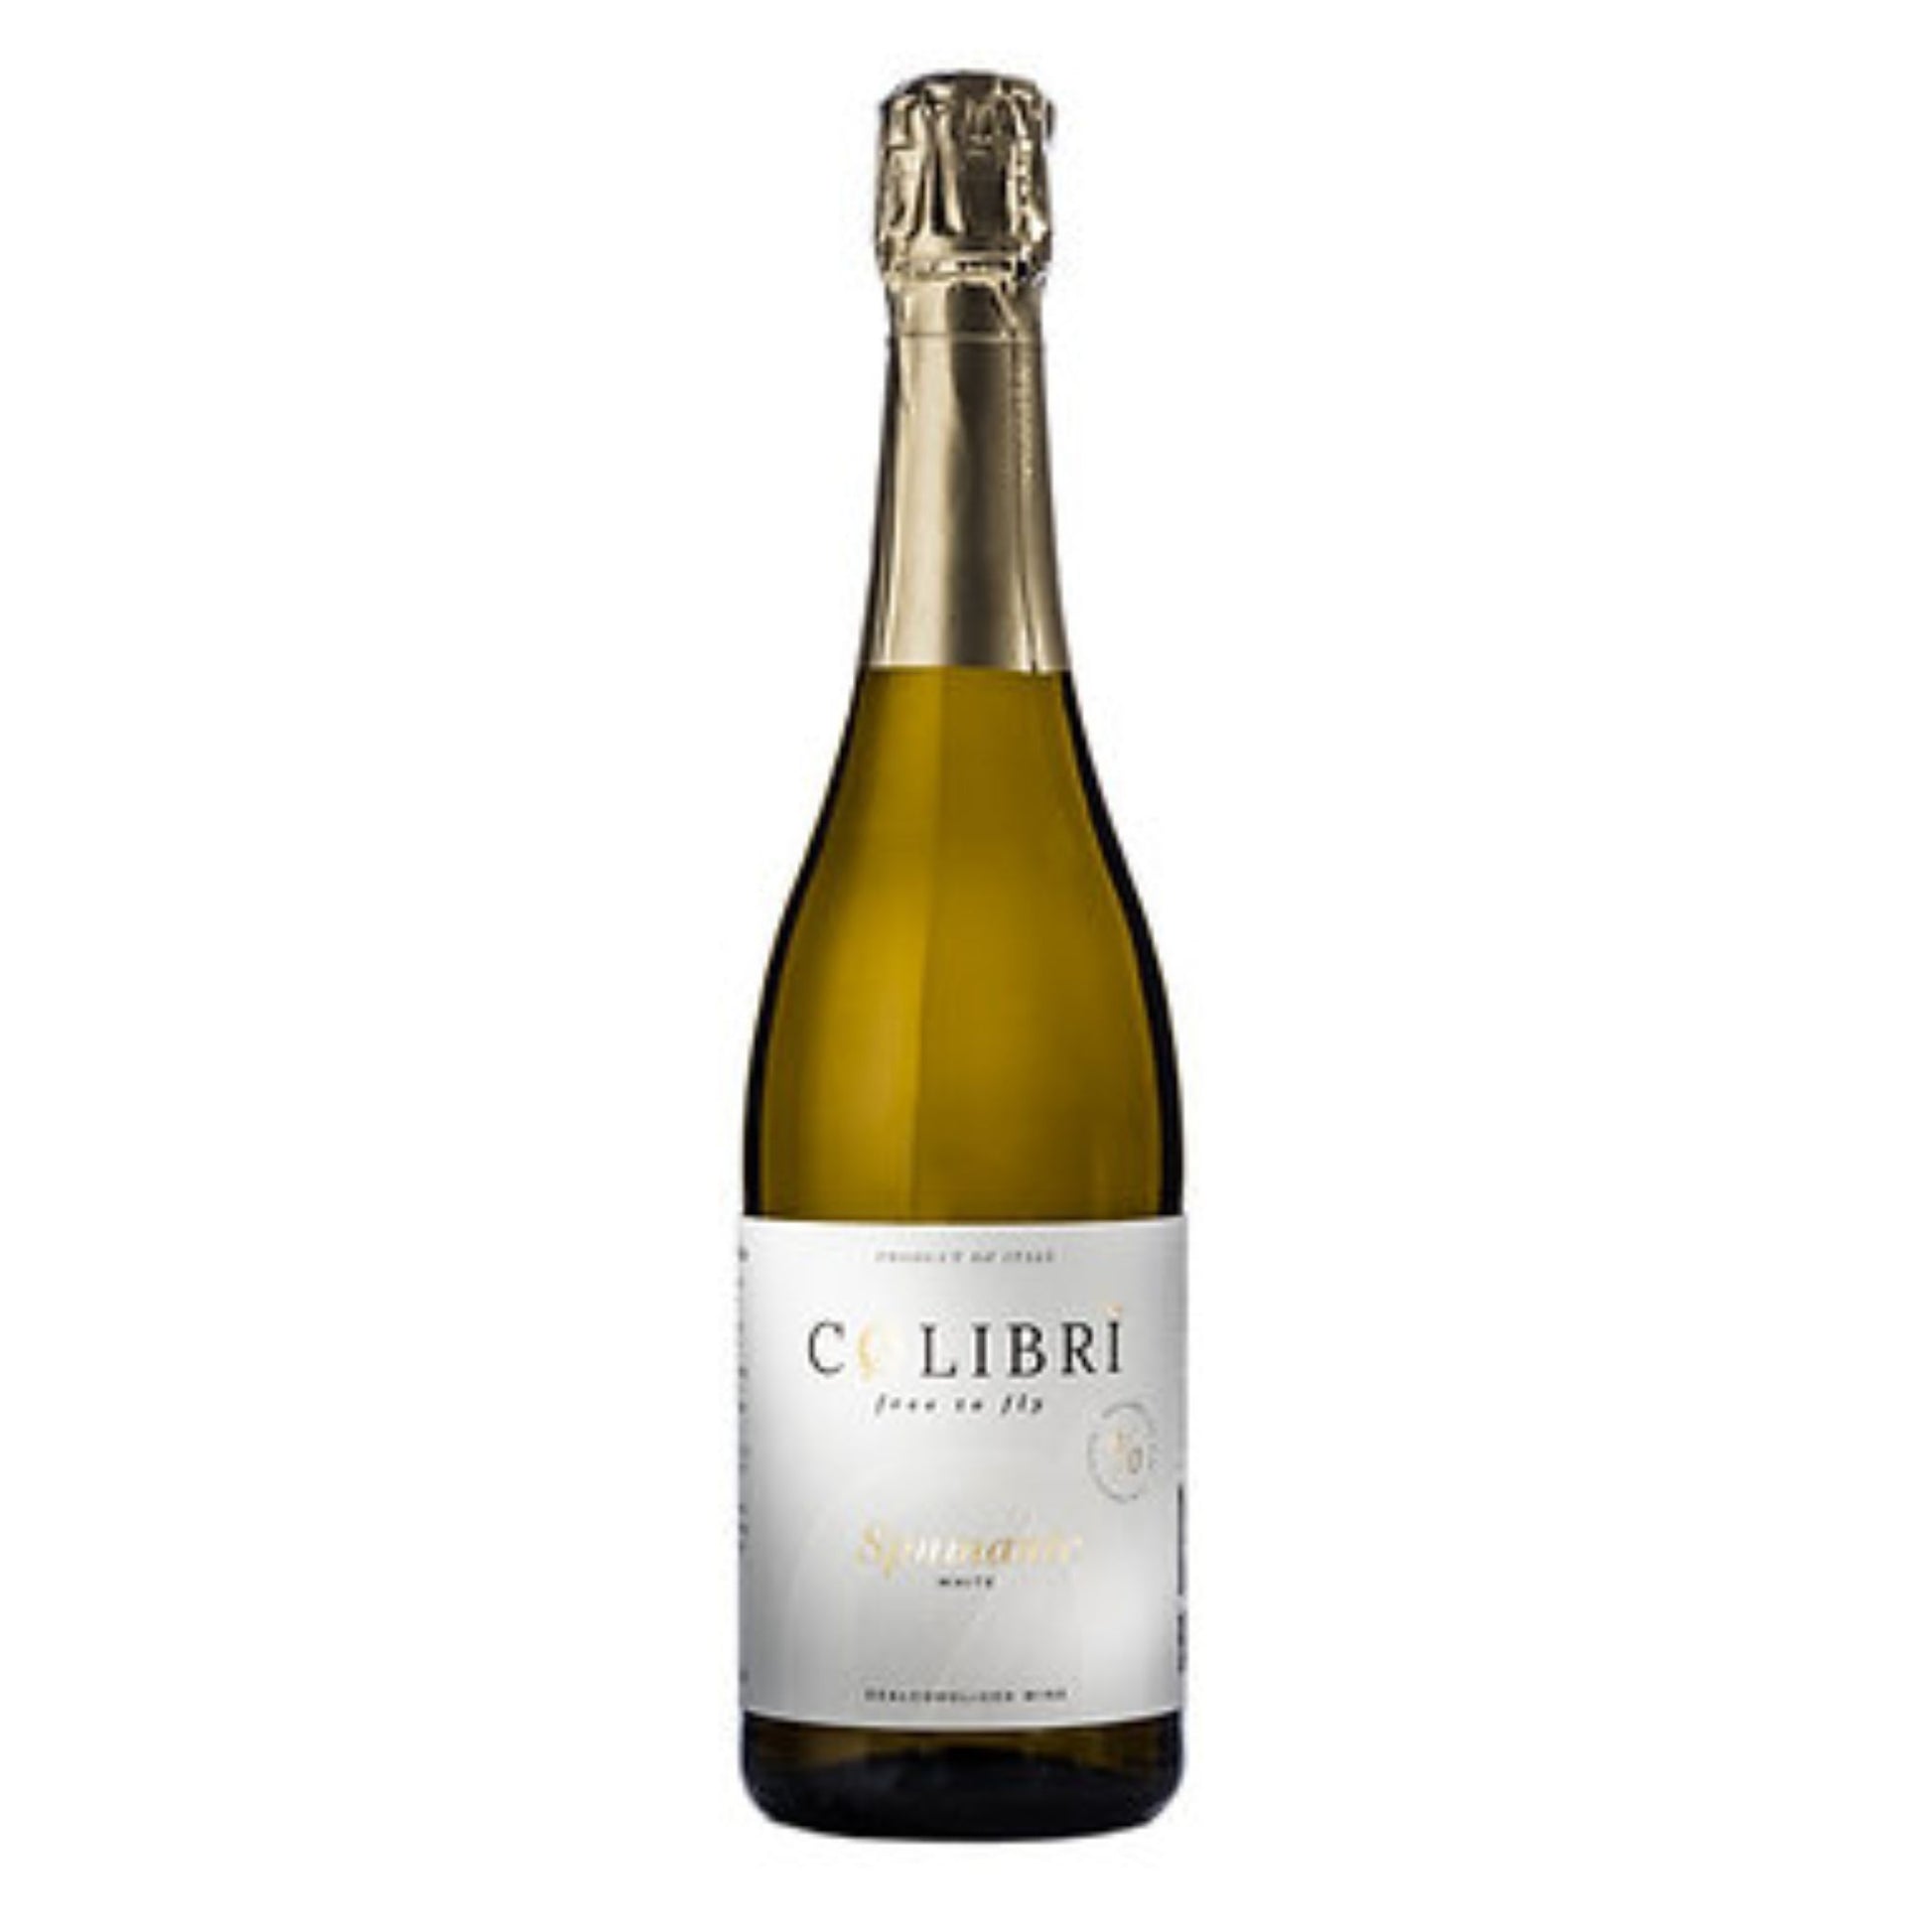 Cølibrì Non-Alcoholic Spumante White is available at Knyota Non-Alcoholic Drinks.